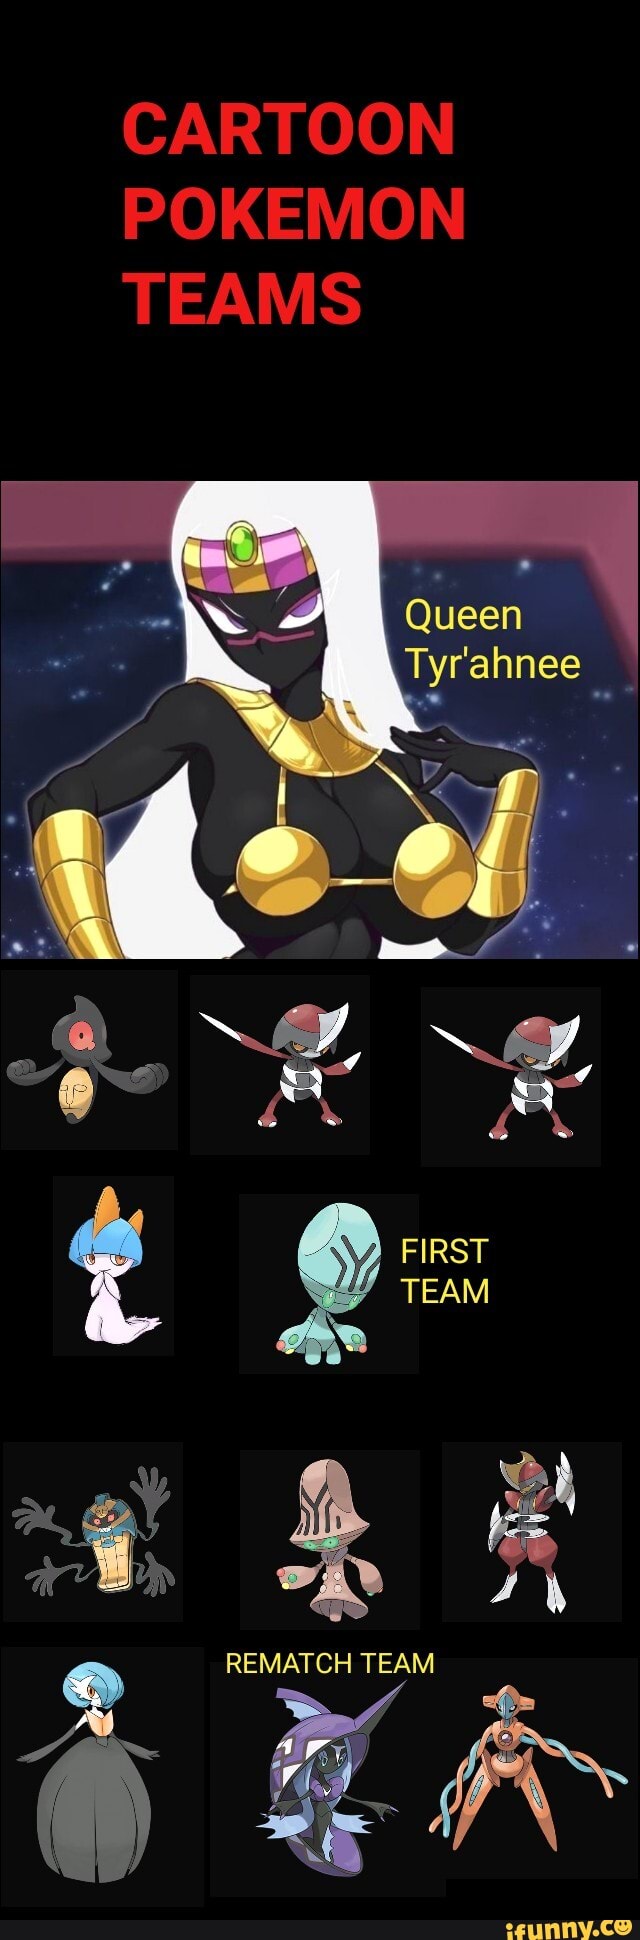 Tyr memes. Best Collection of funny Tyr pictures on iFunny Brazil